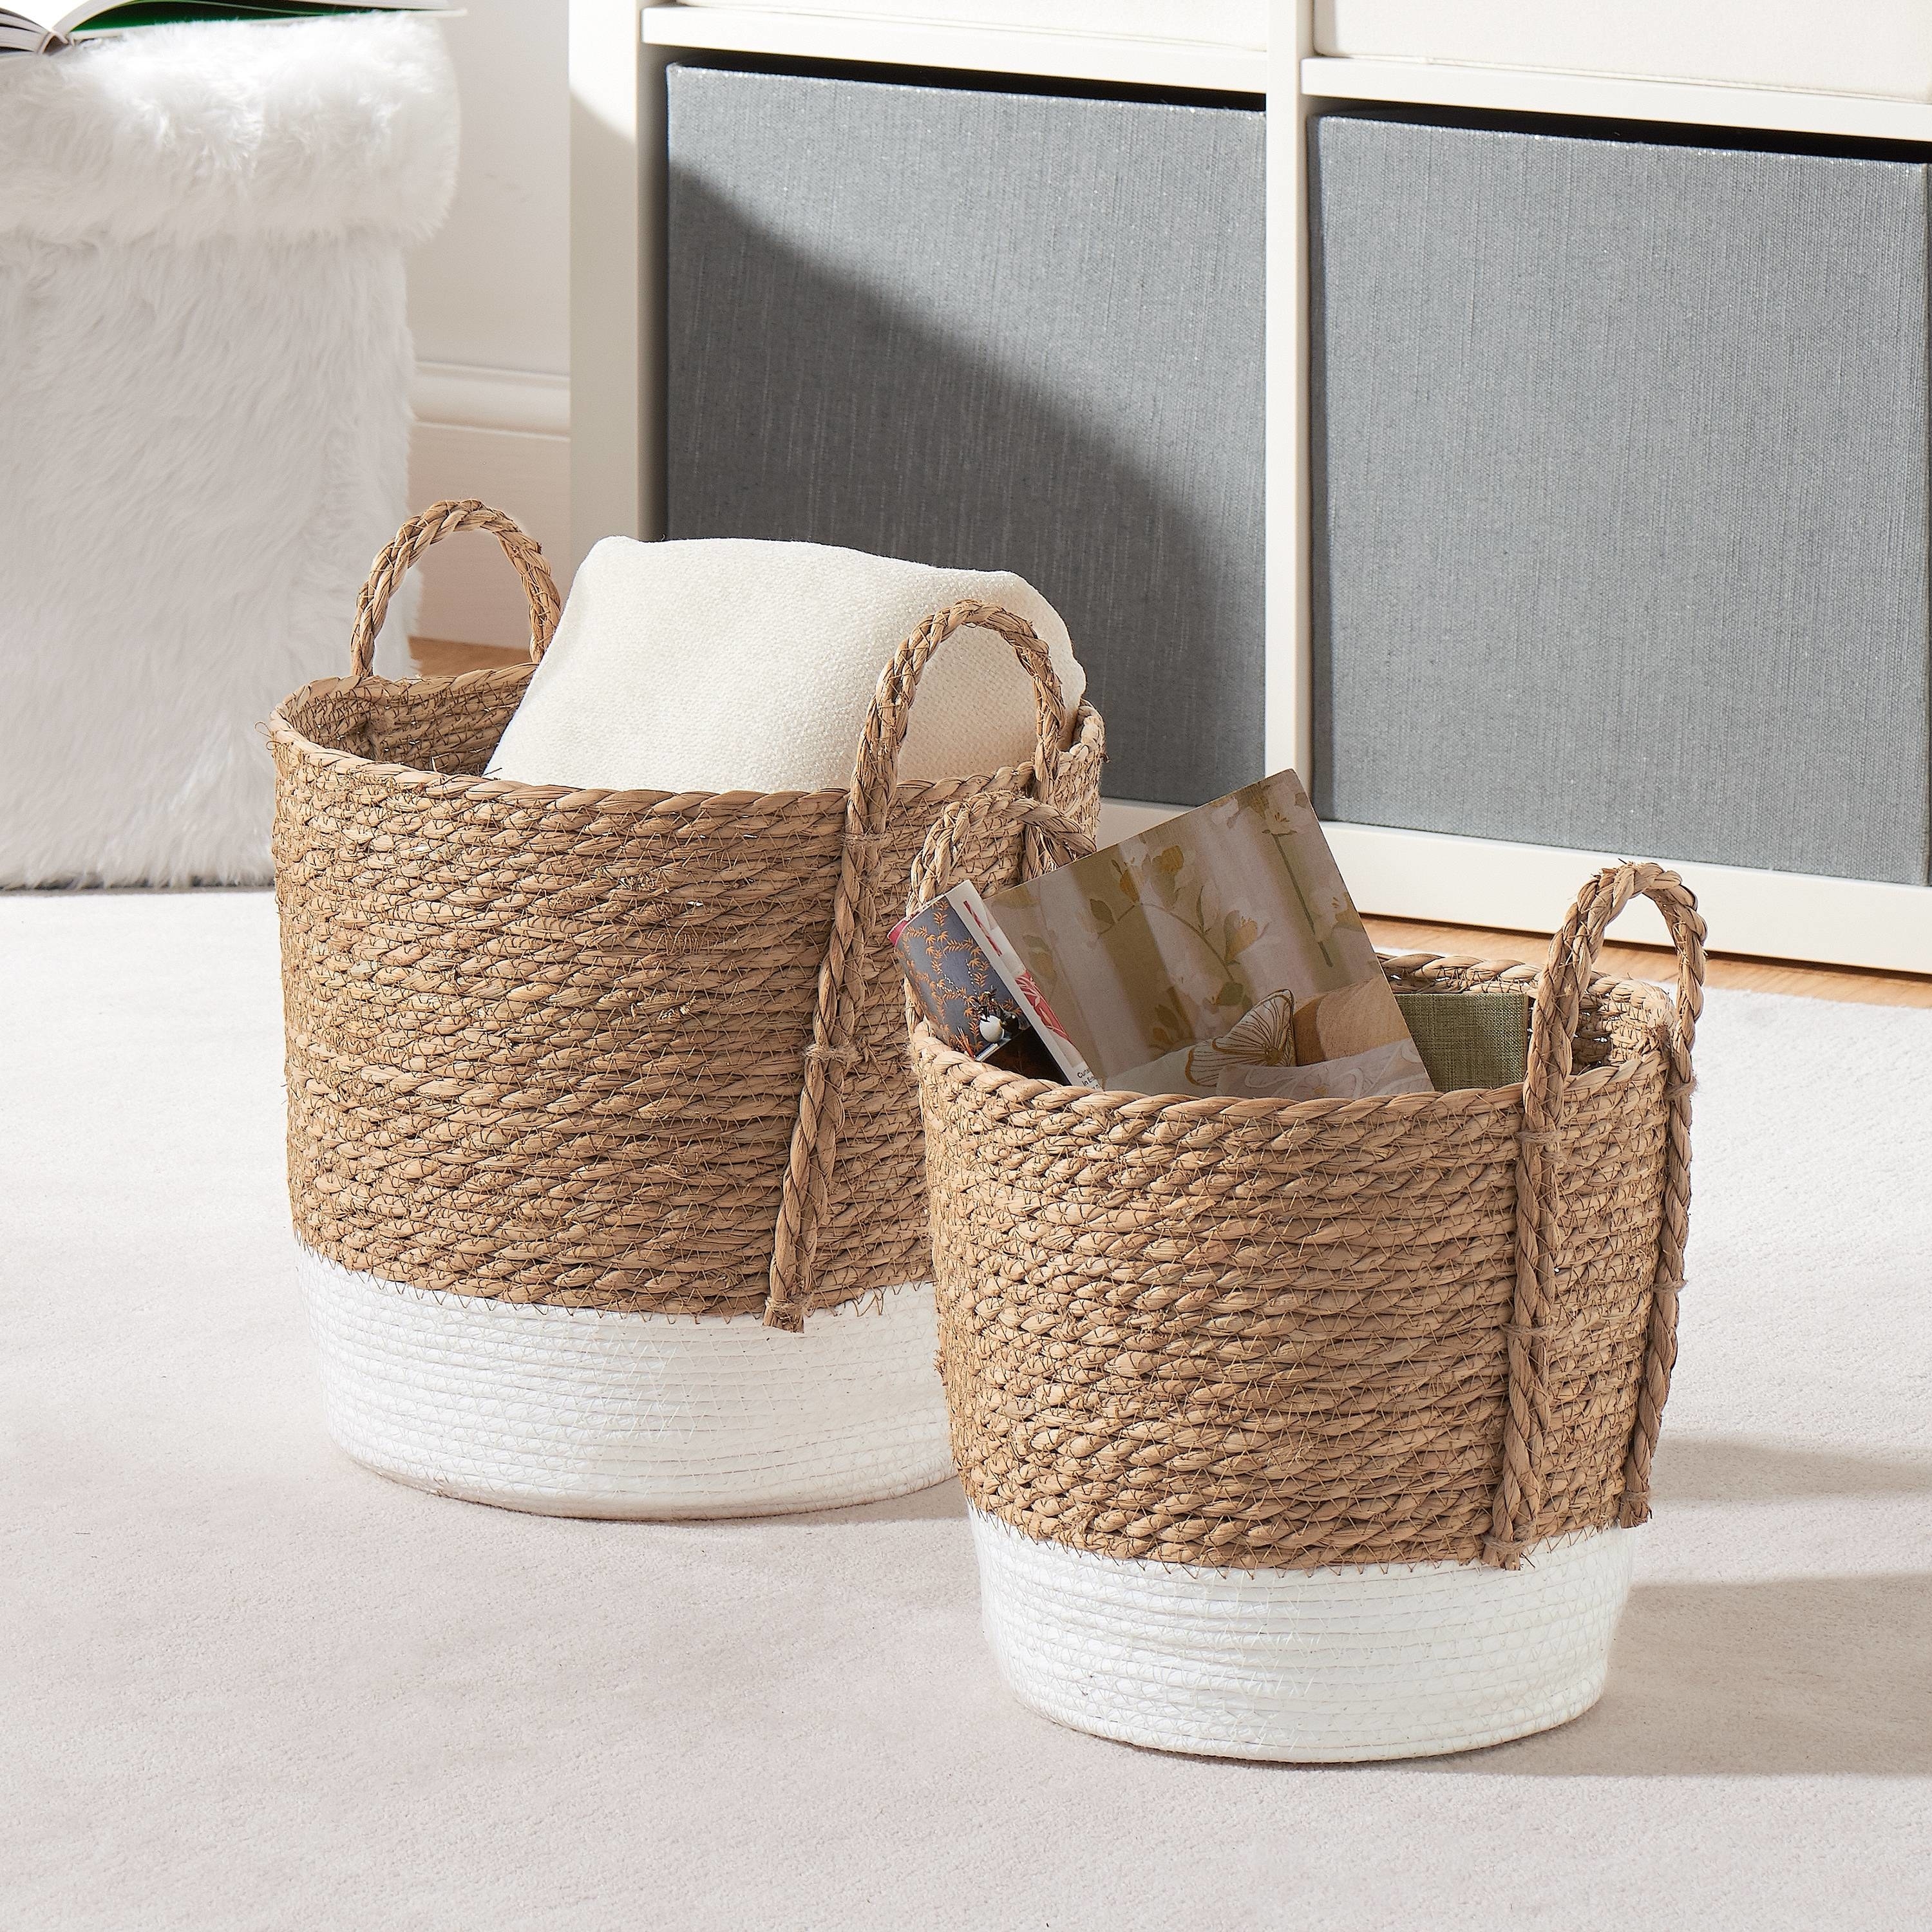 2 natural colored rope baskets with handles and white bottom